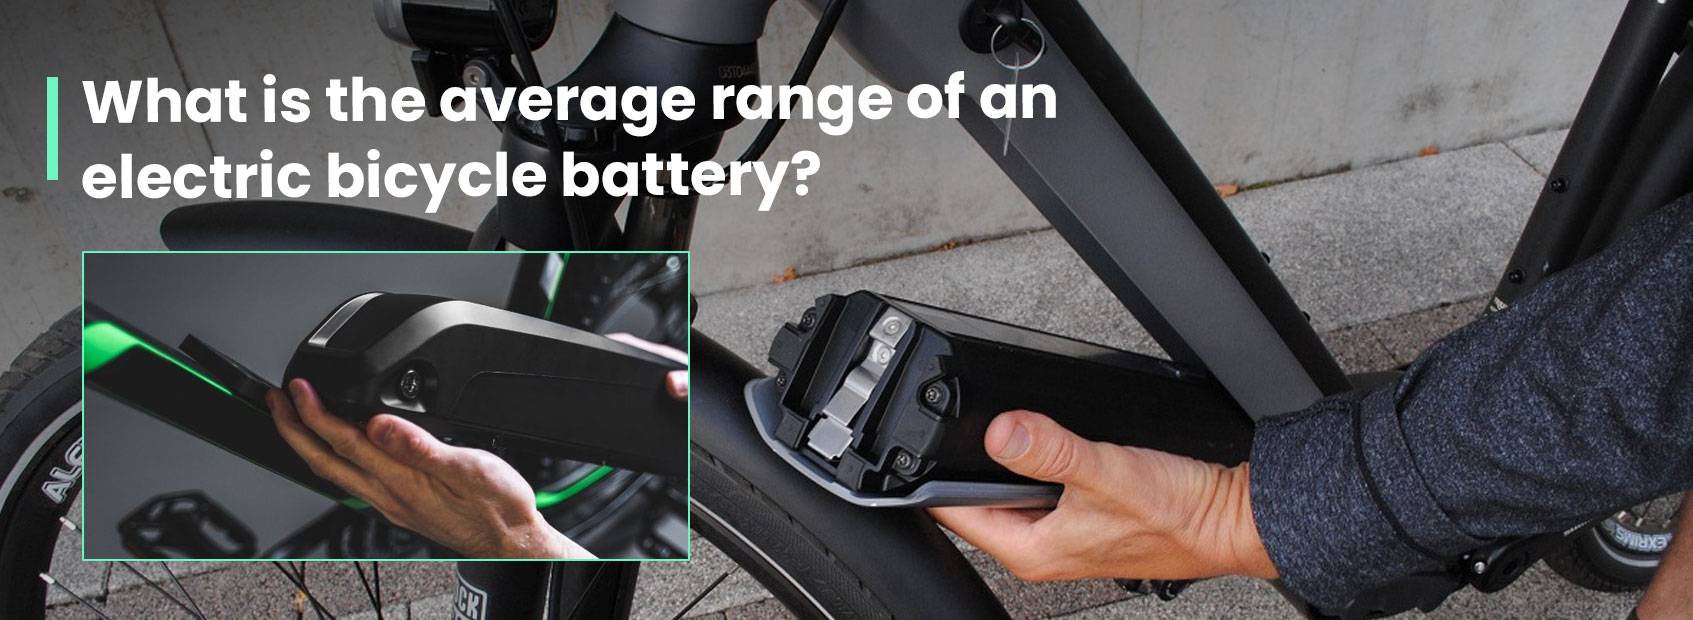 What is the average range of an electric bicycle battery?